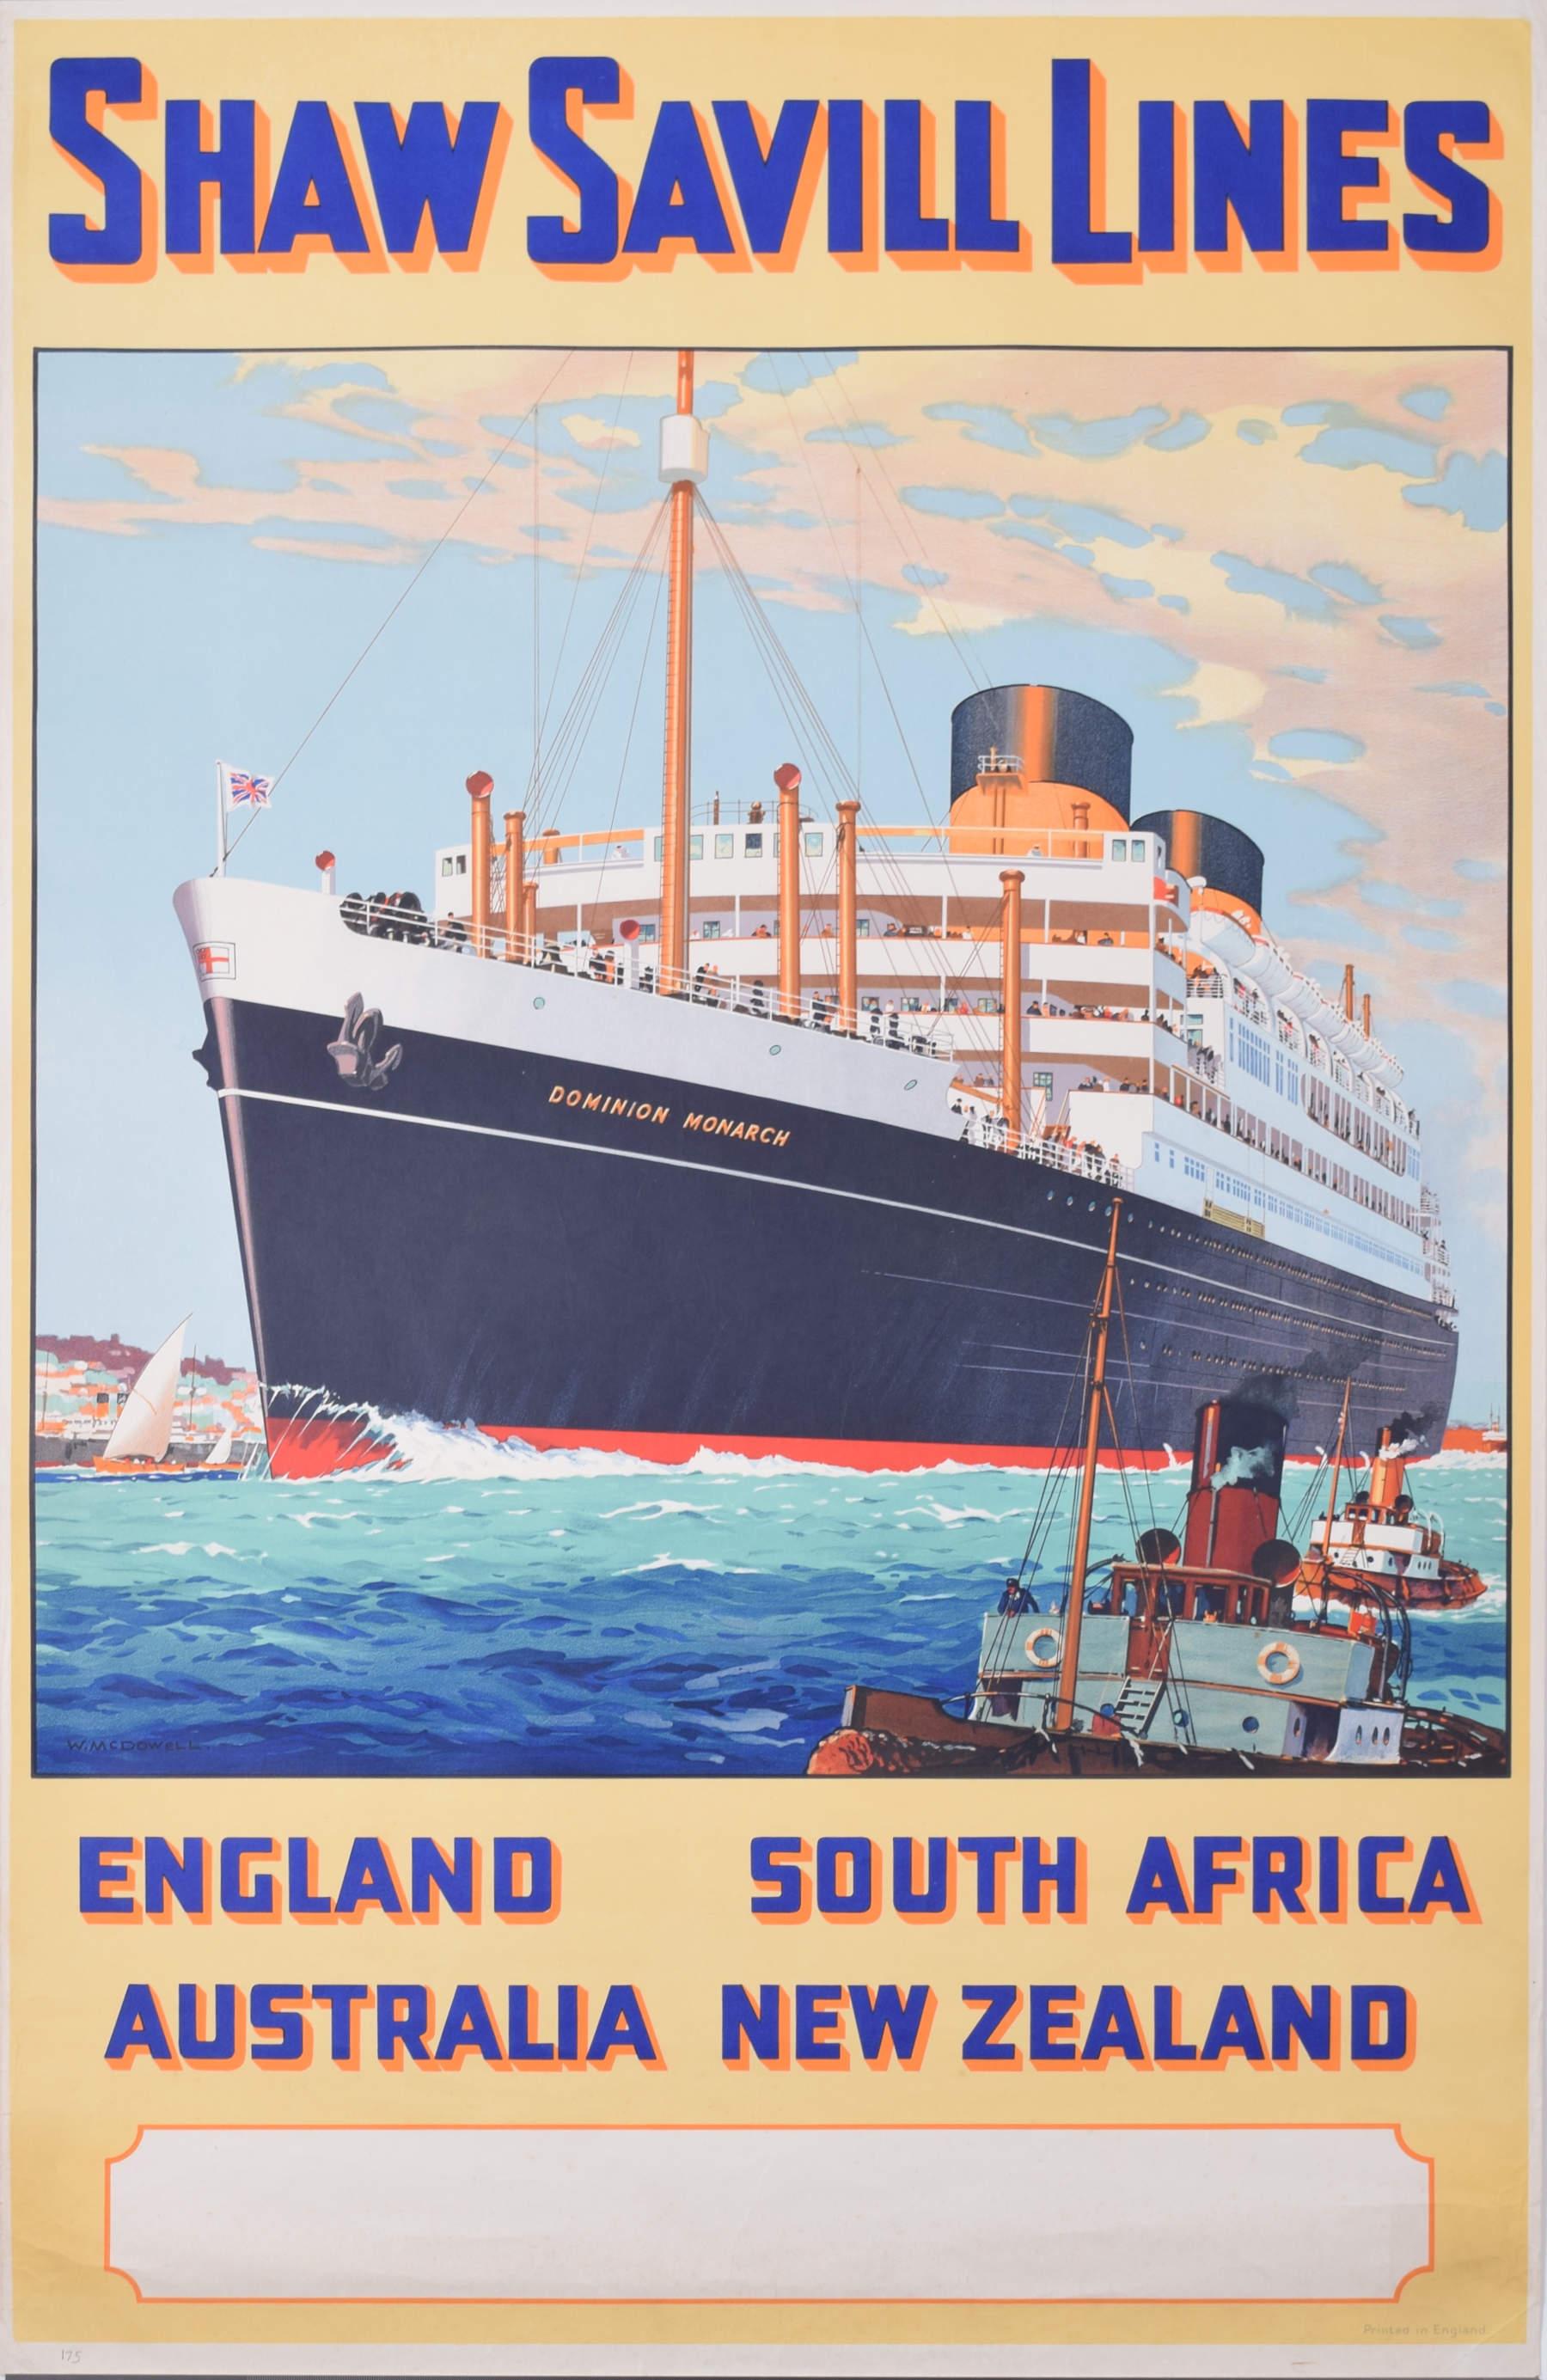 To see our other original vintage posters, scroll down to "More from this Seller" and below it click on "See all from this Seller" - or send us a message if you cannot find the poster you want.

William McDowell (1888 - 1950)
Shaw Savill Lines -